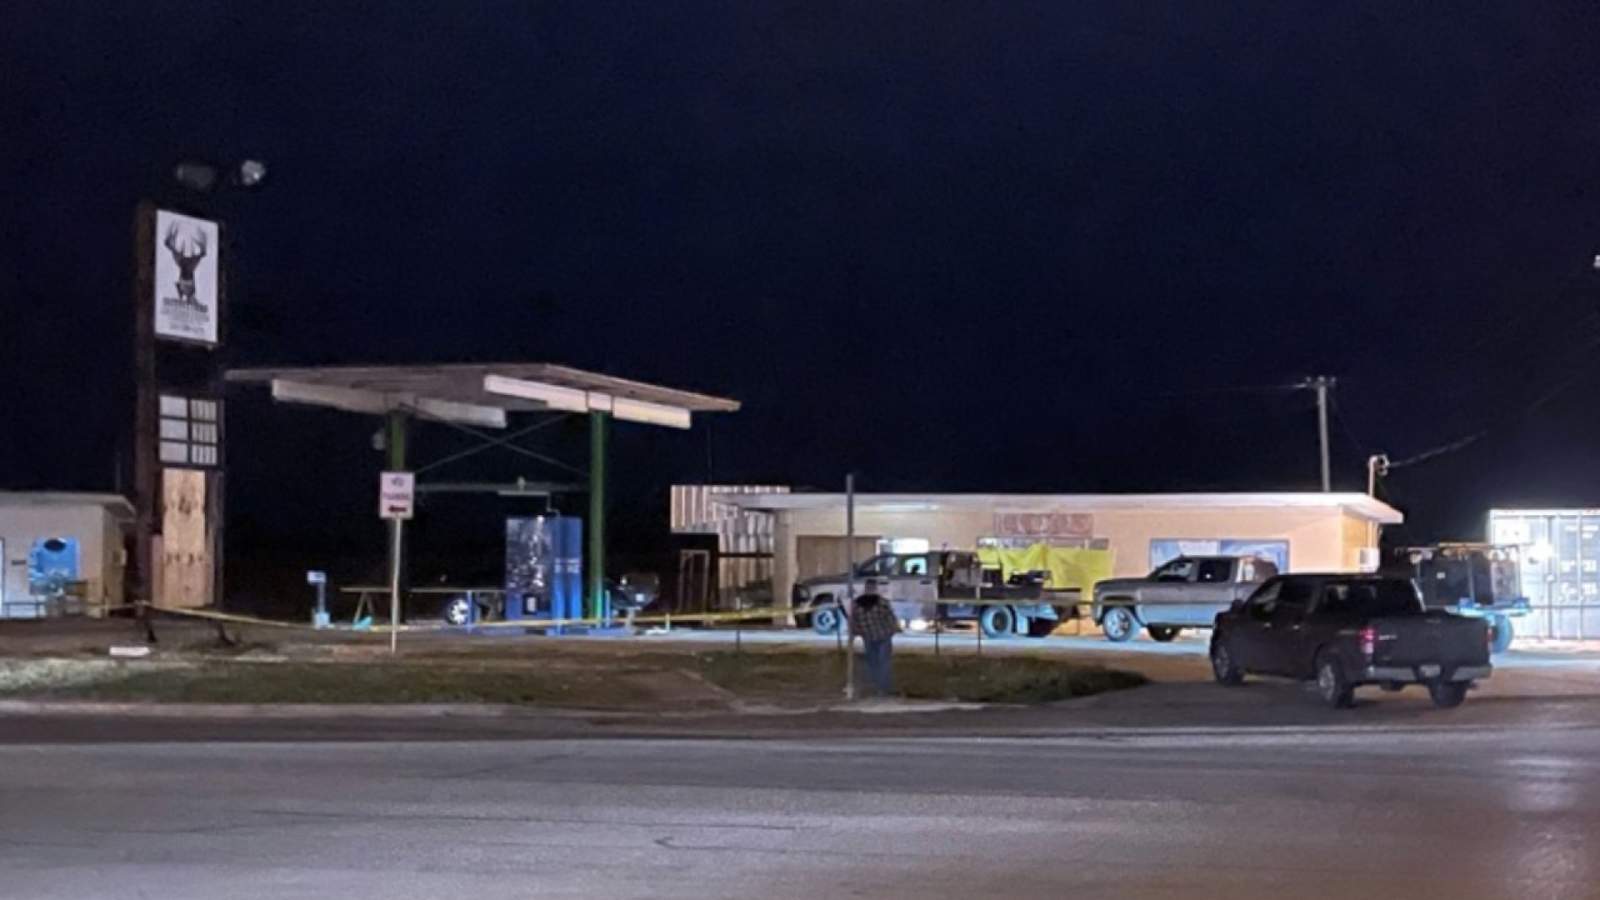 Police, Texas Rangers investigating possible shooting in Poteet